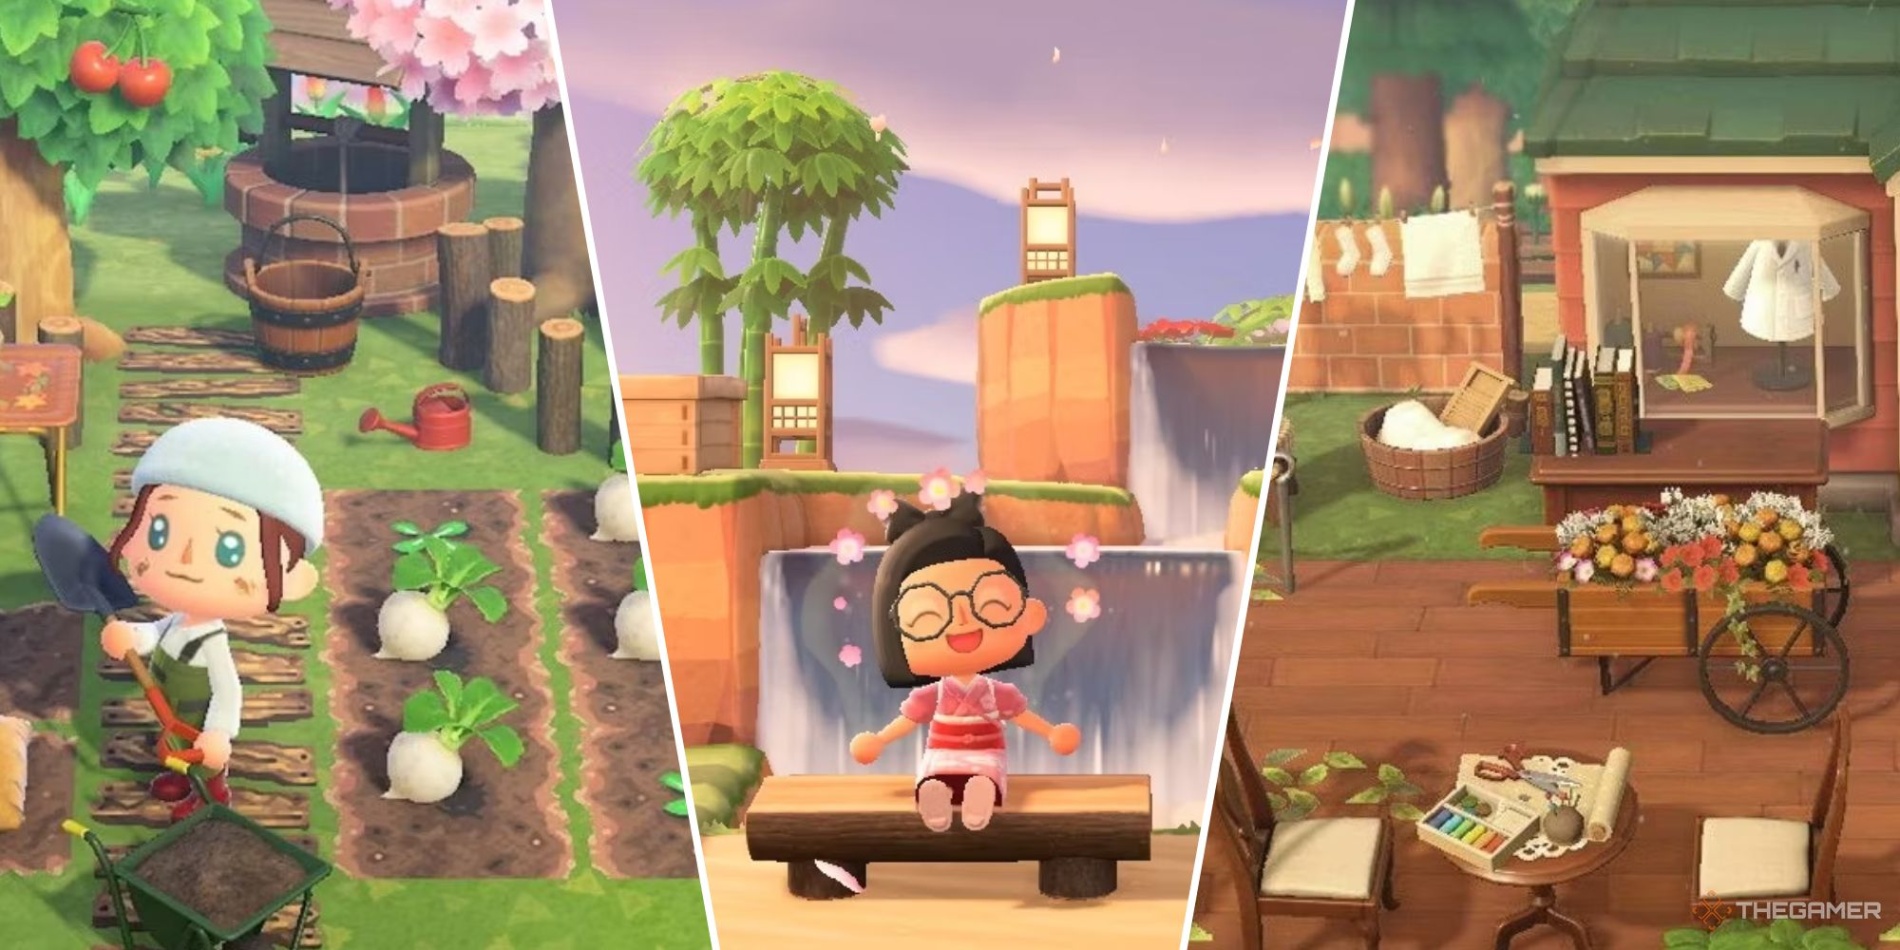 acnh design ideas Bulan 4 Decoration Ideas For A Five-Star Island Rating In Animal Crossing